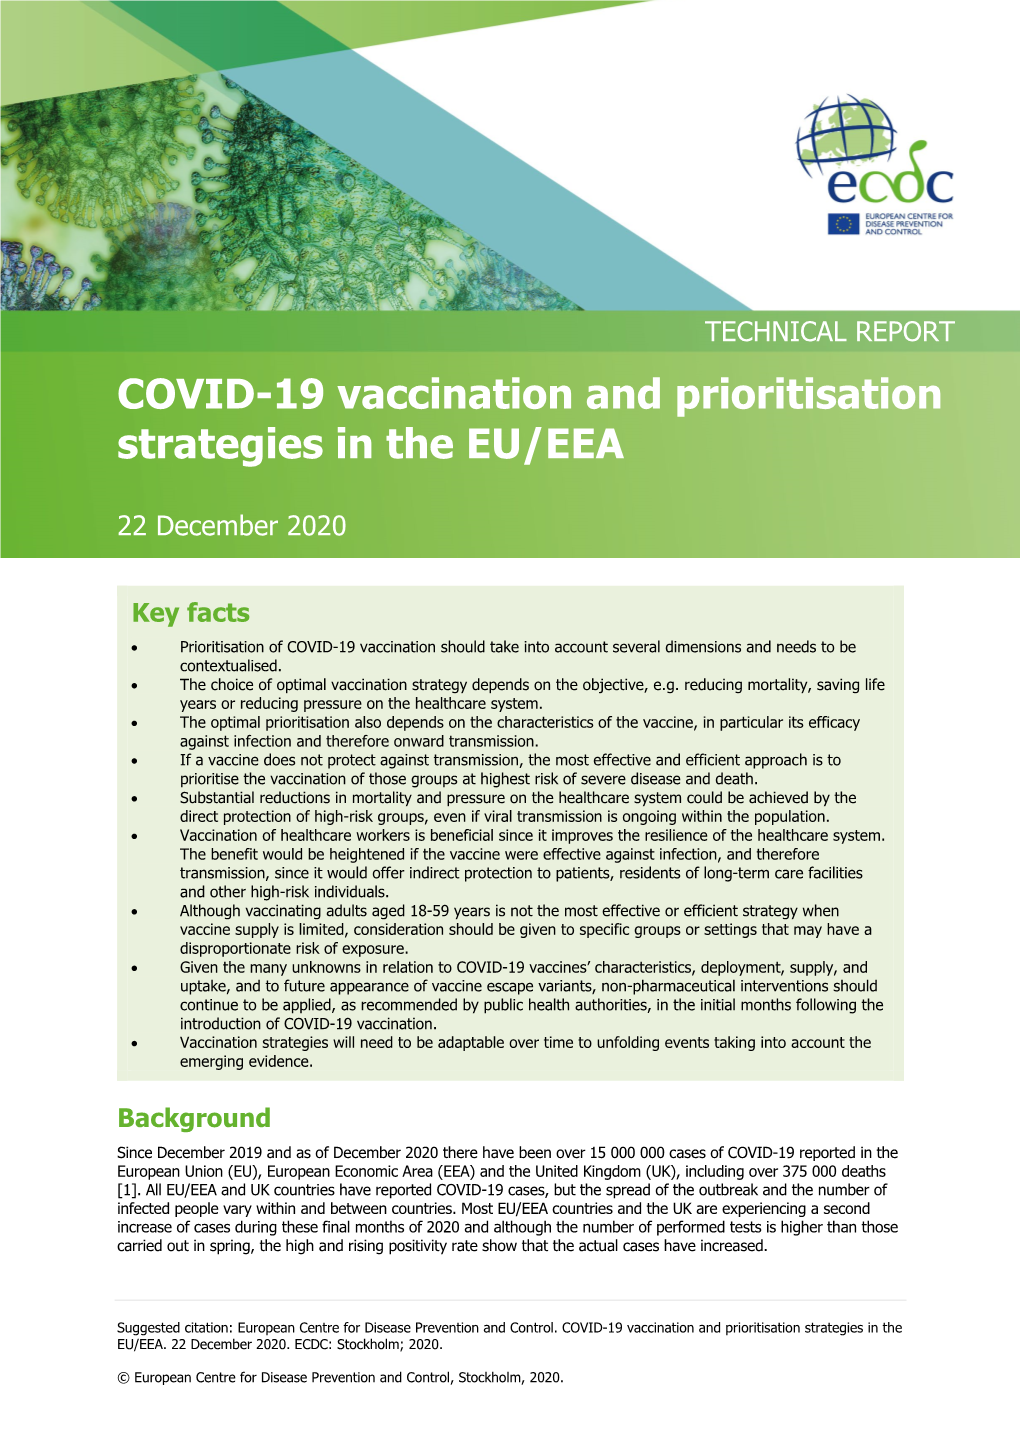 COVID-19 Vaccination and Prioritisation Strategies in the EU/EEA